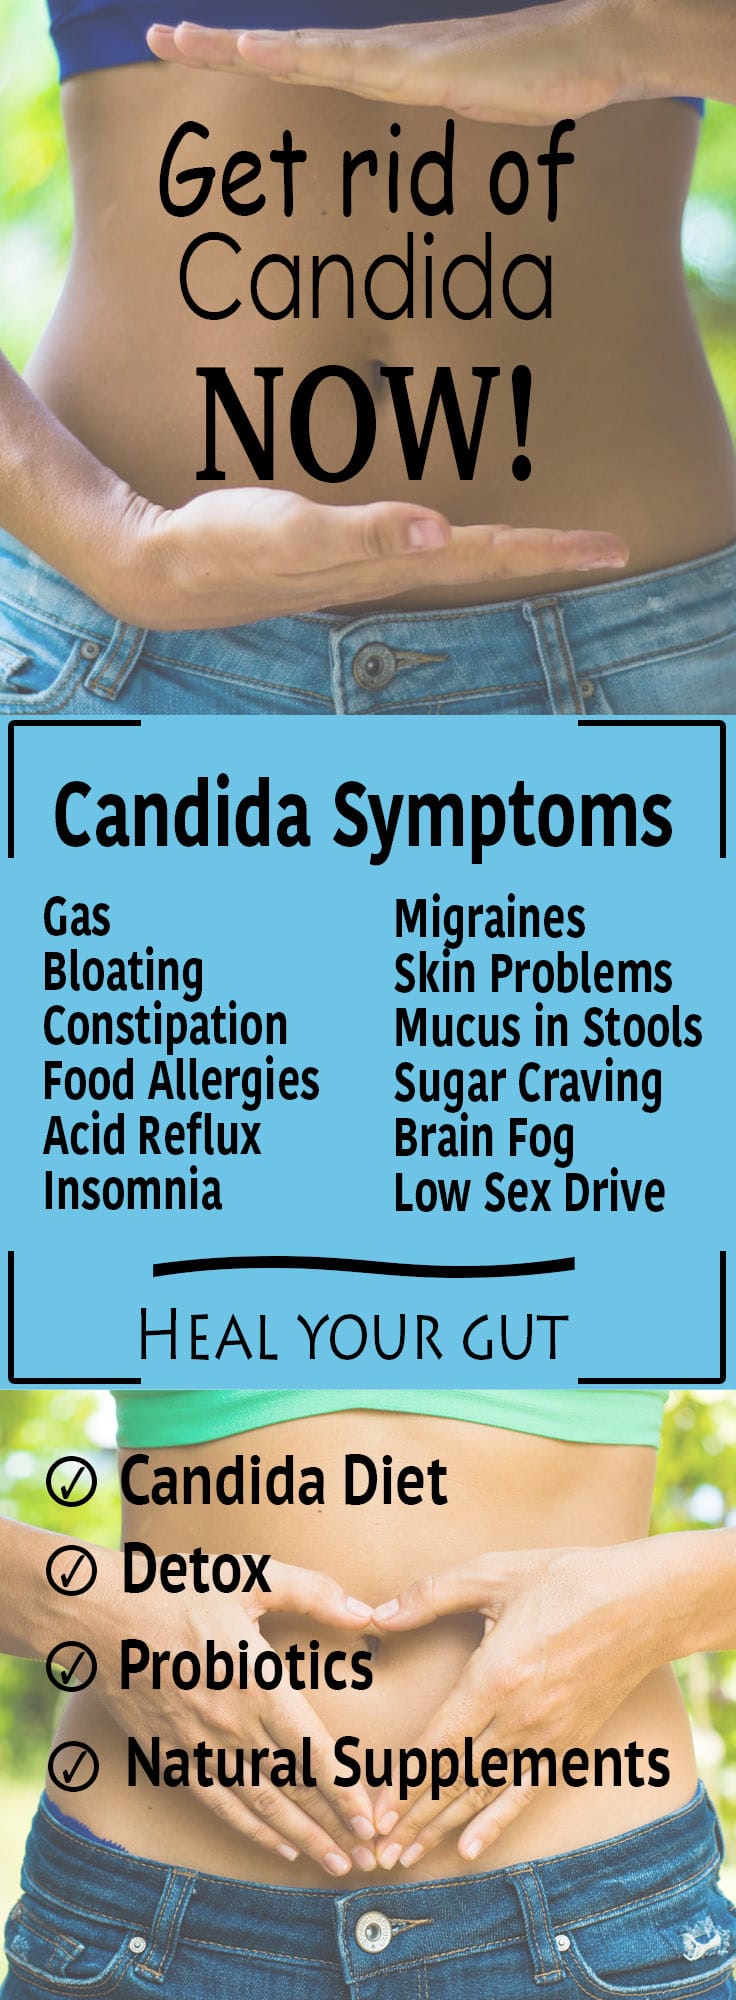 How to get rid of Candida. A natural treatment for Candida